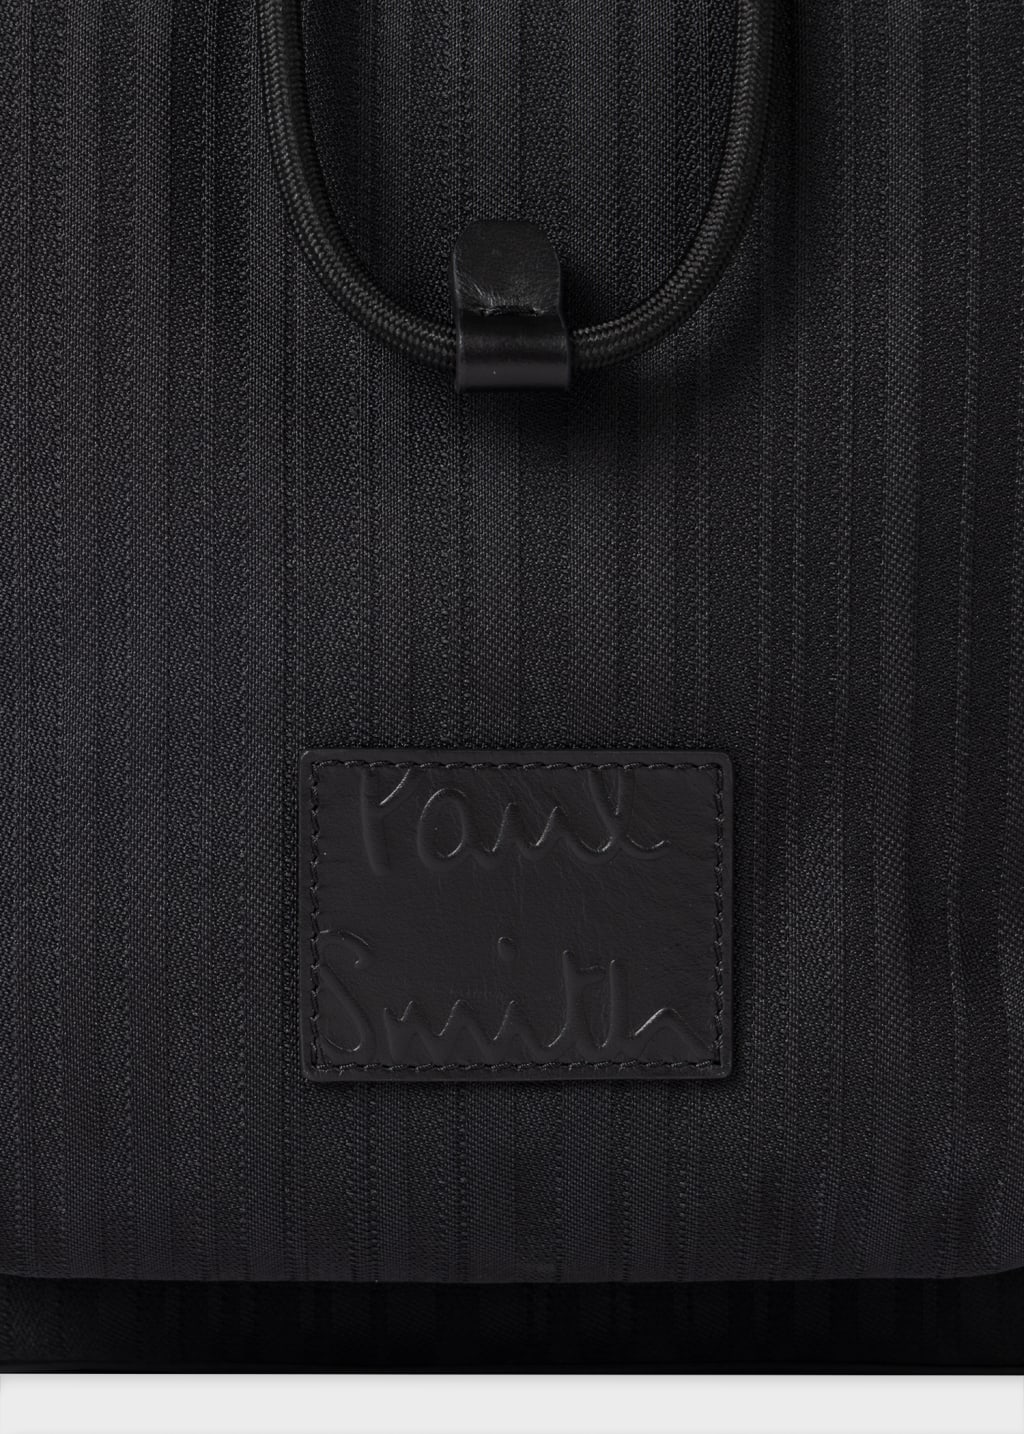 Detail View - Black 'Shadow Stripe' Backpack Paul Smith